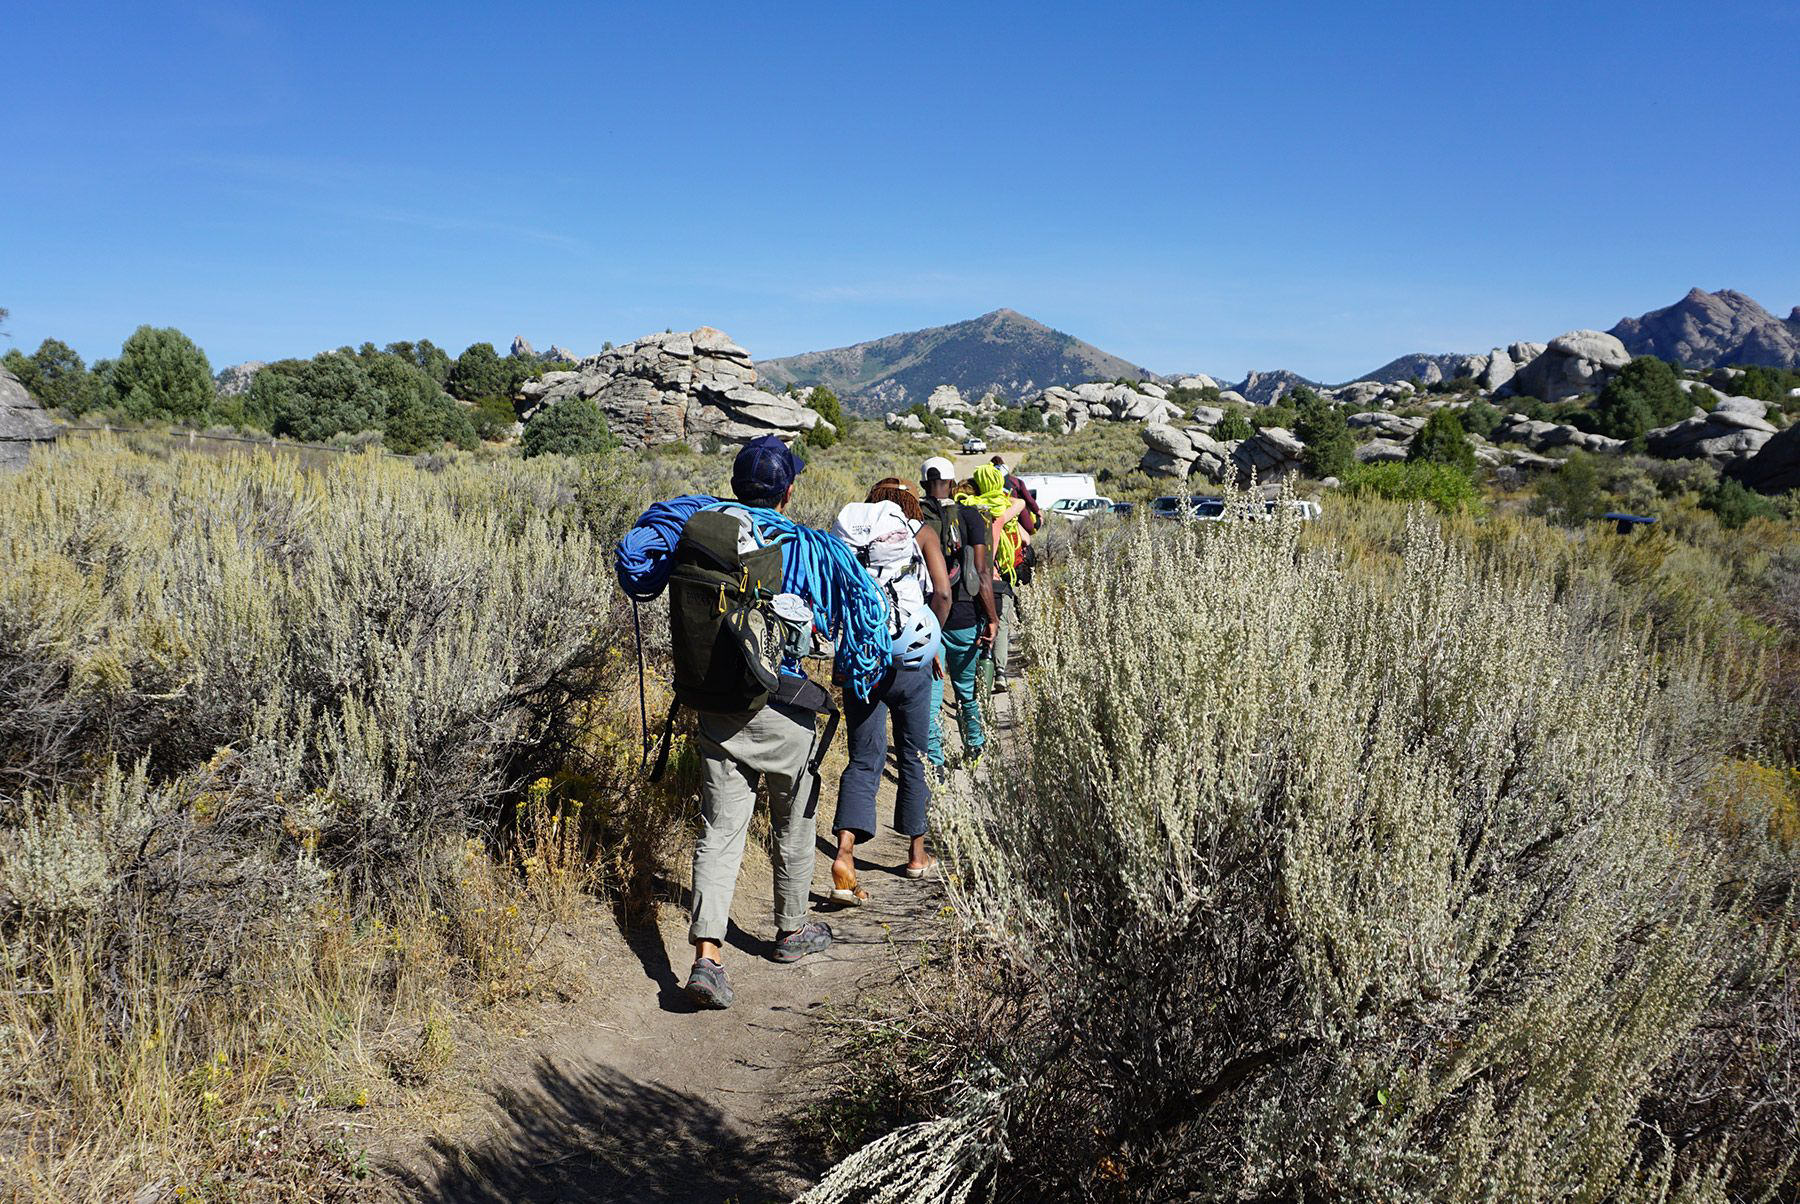 The group hikes through sage brush with packs on